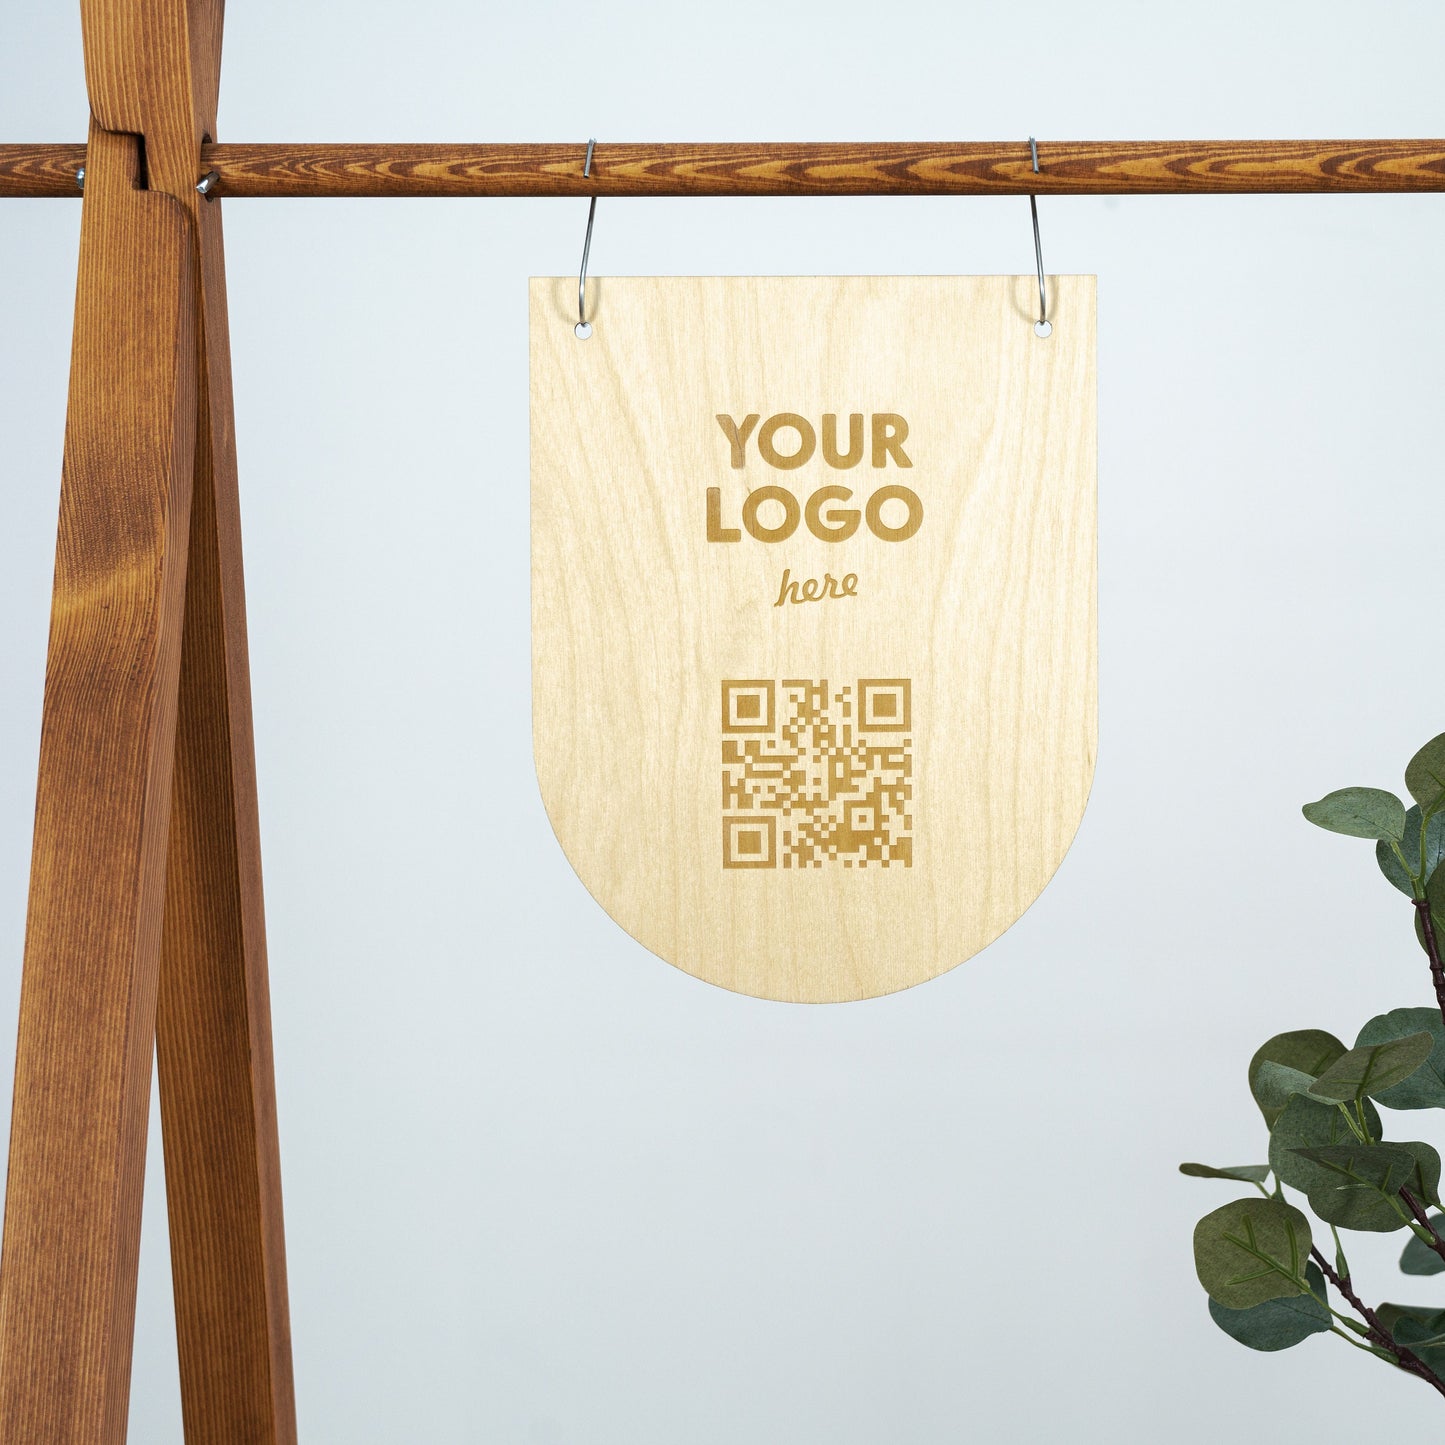 SET Brandberg: Set of engraved plywood signs with your logo or brand name | Pennant with logo | QR code sign | Website tag | Milimetry